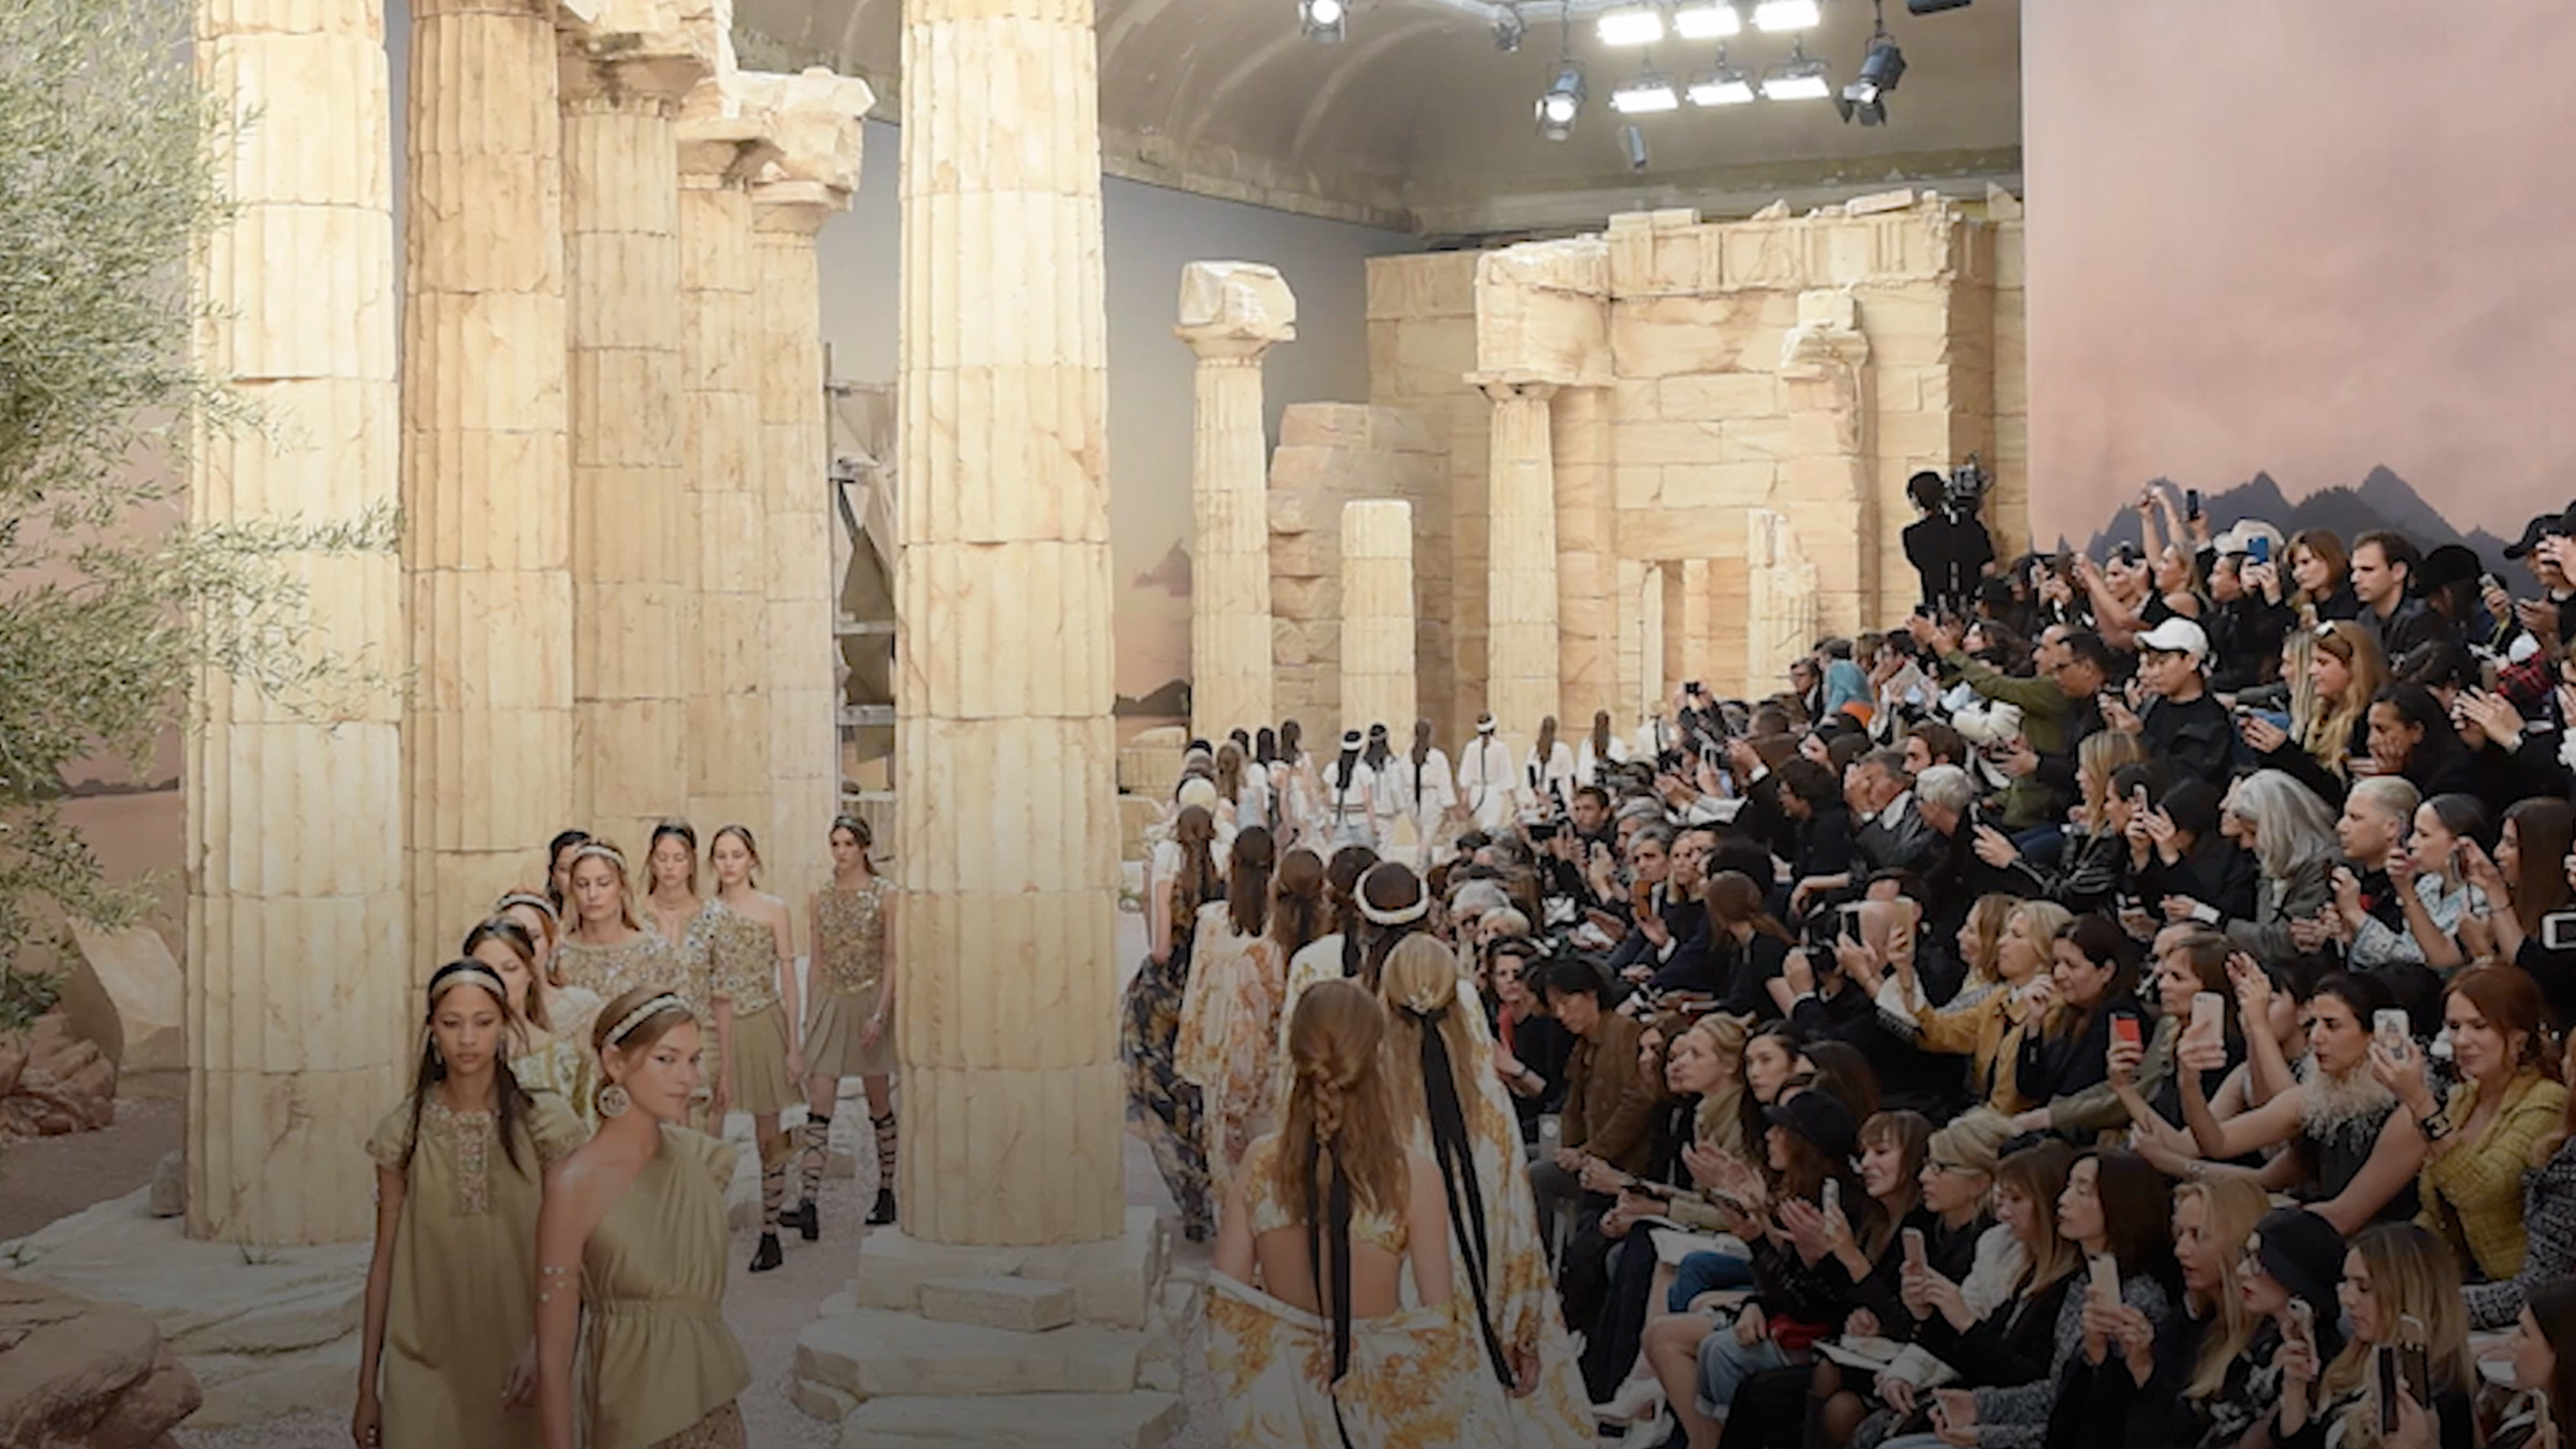 Why Karl Lagerfeld Was Missing from the Chanel Couture Spring 2019